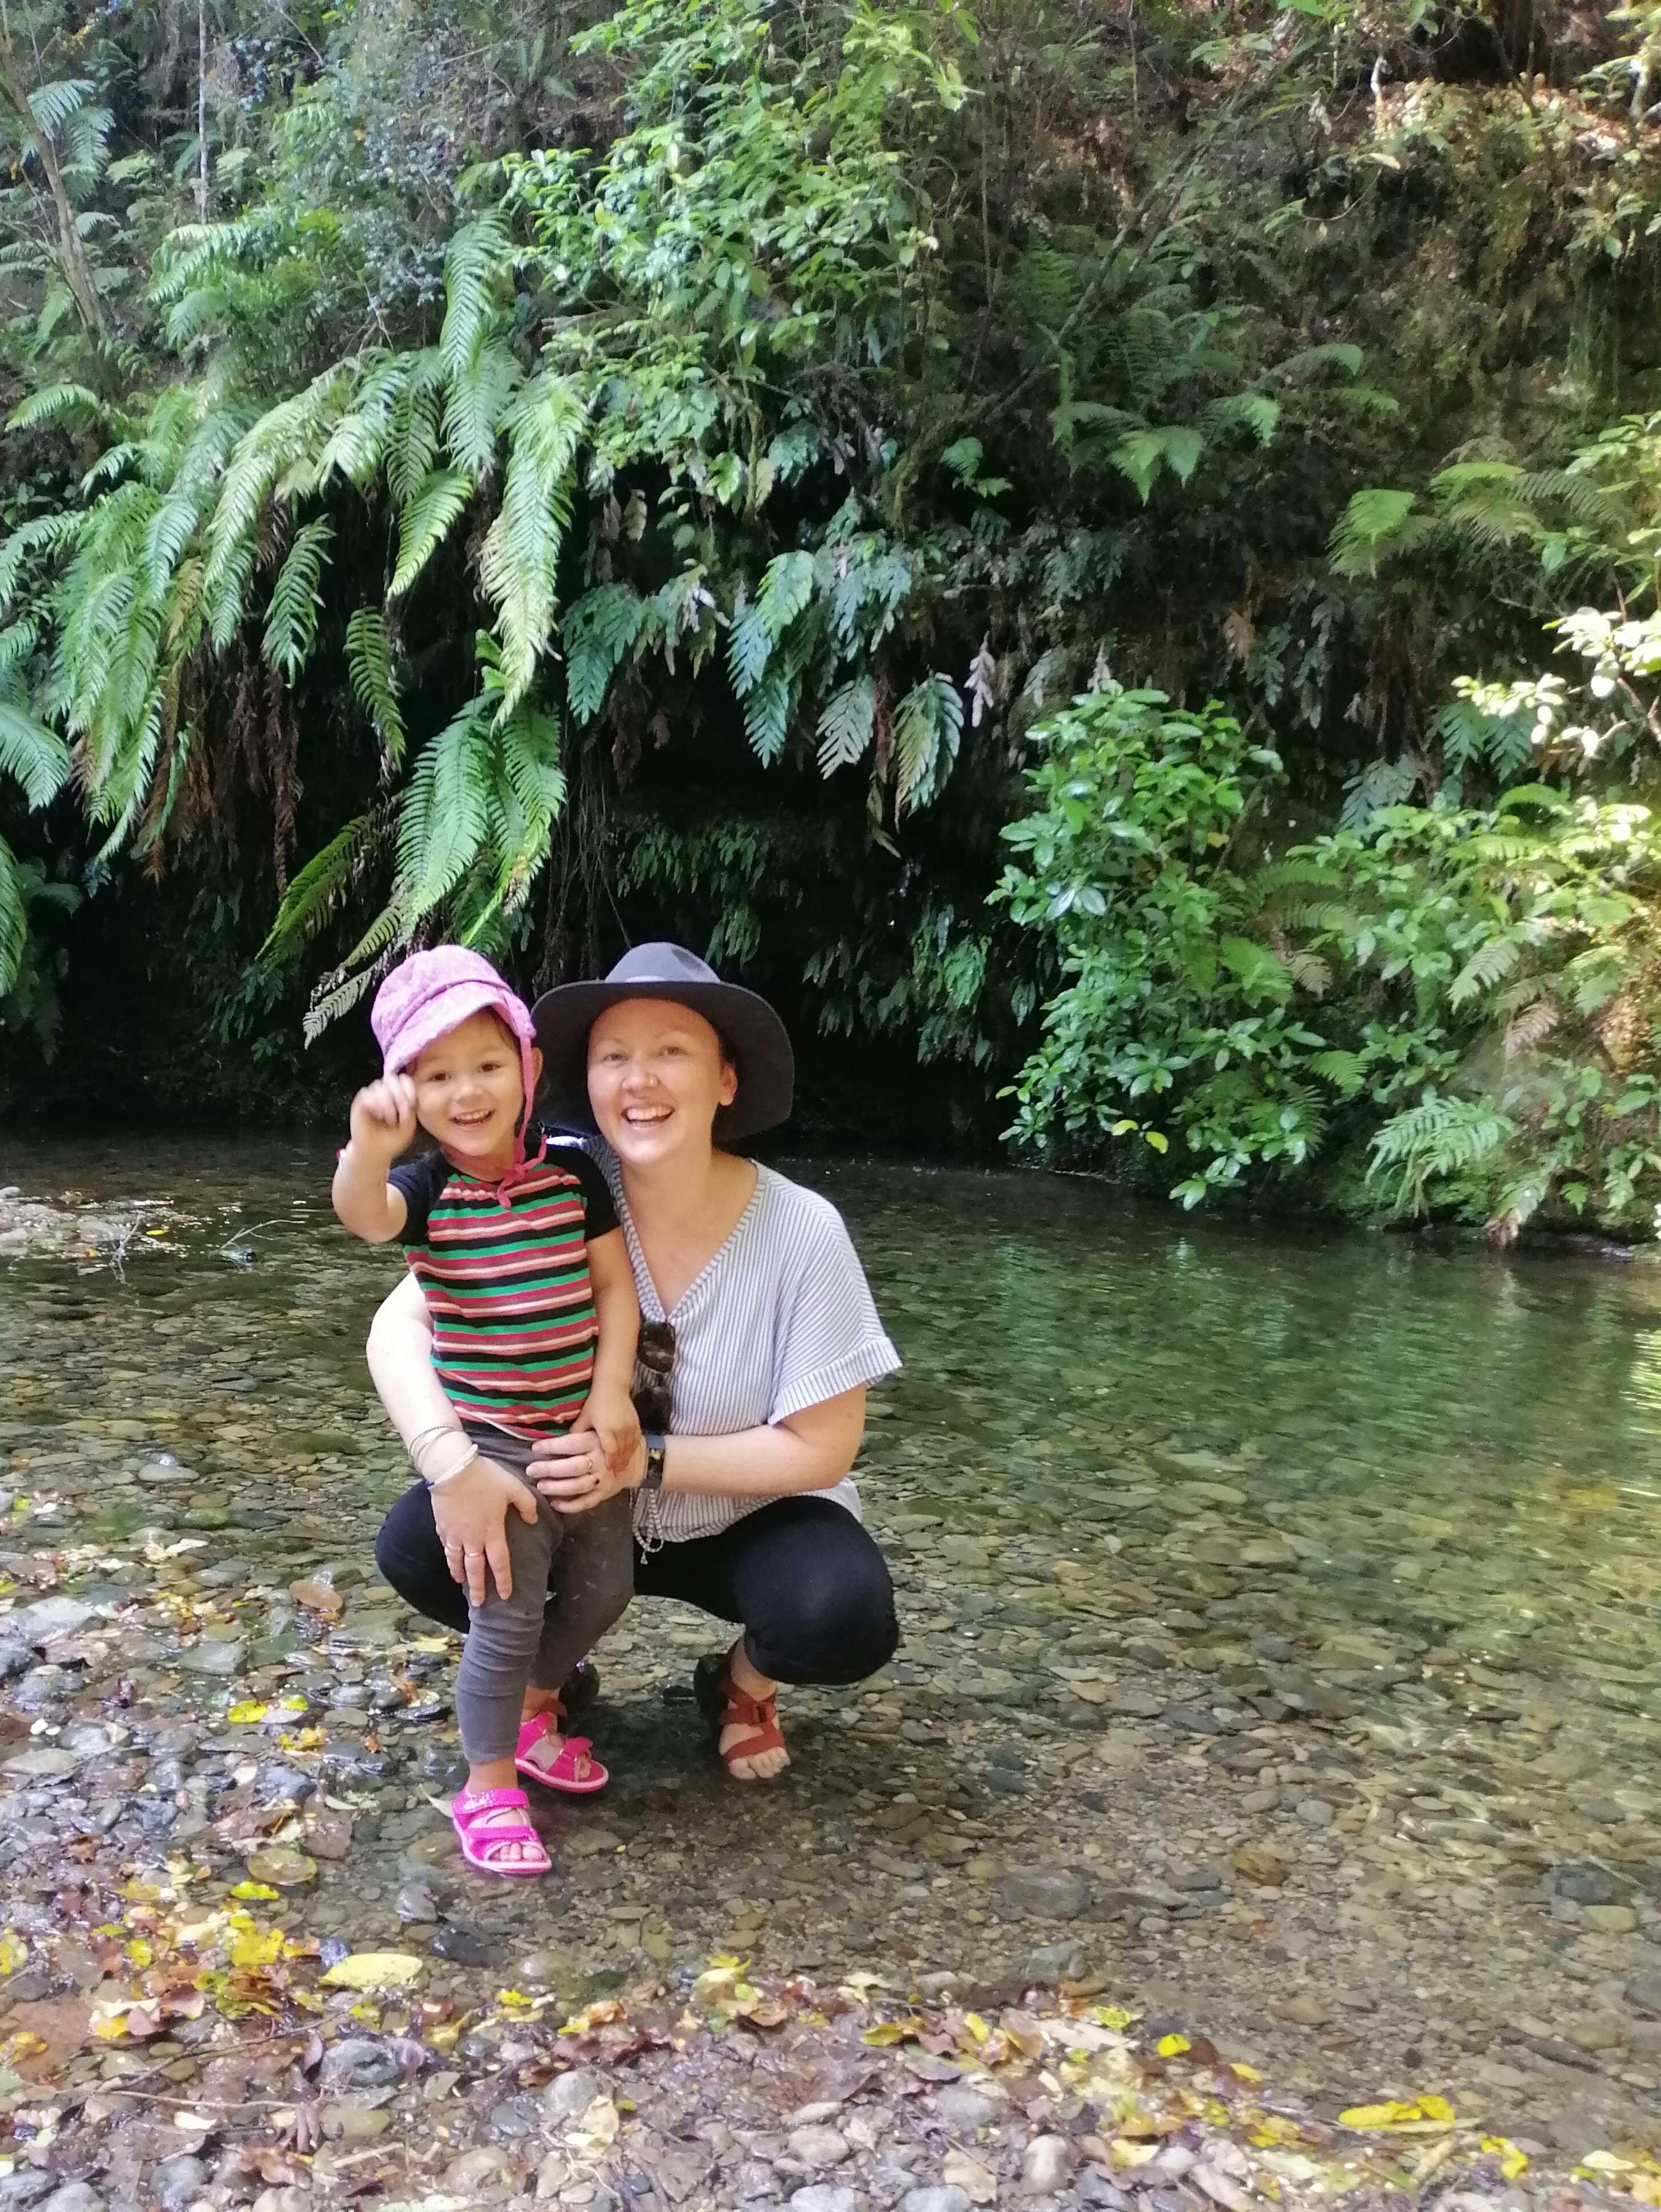 A woman and her daughter are standing on rocky ground and smiling towards the camera. Both are wearing hats.